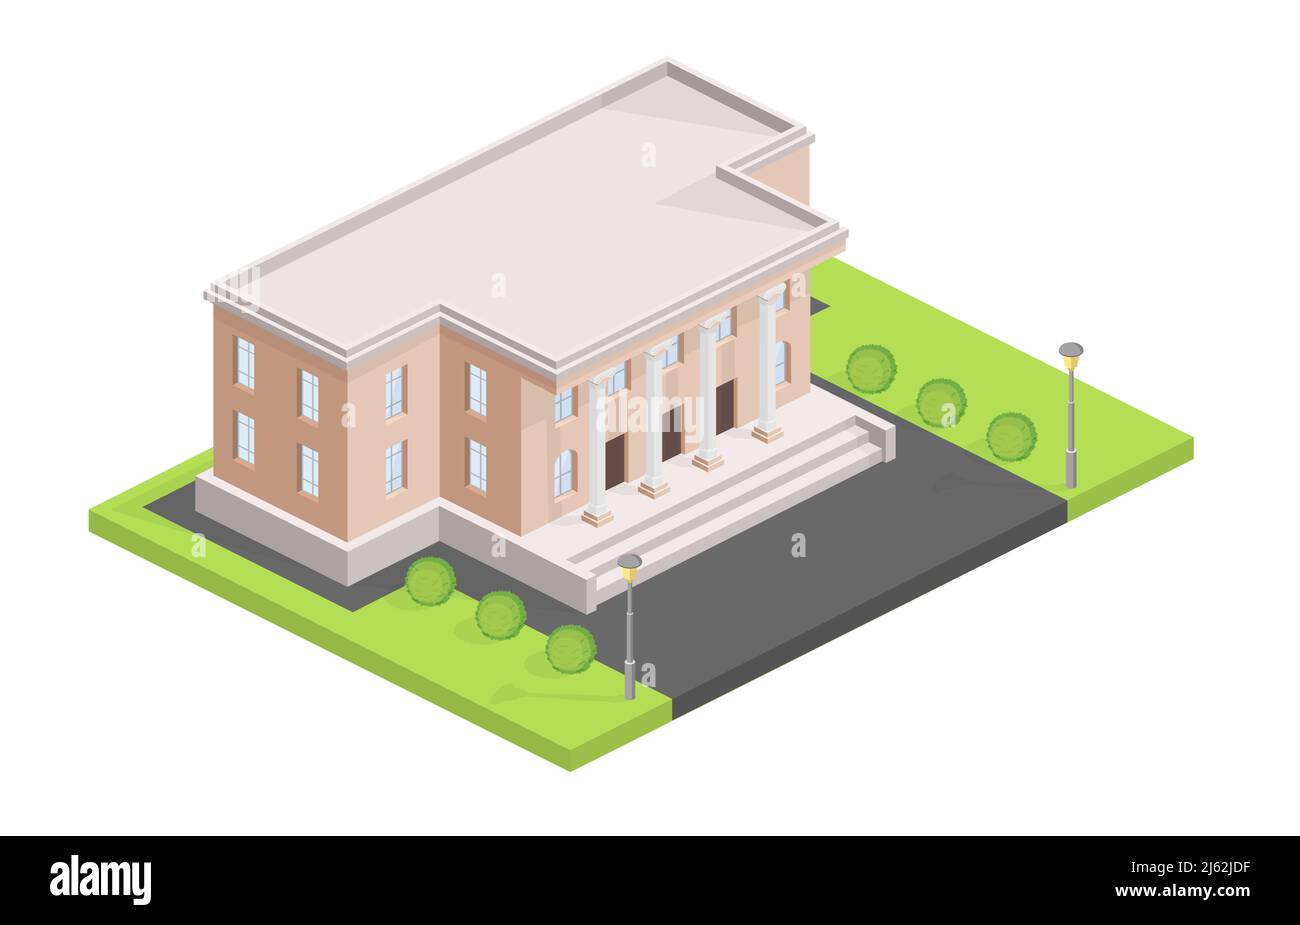 Museum building isometric vector illustration. Isolated municipal or administrative house or city hall modern or old historic facade design of bank or Stock Vector